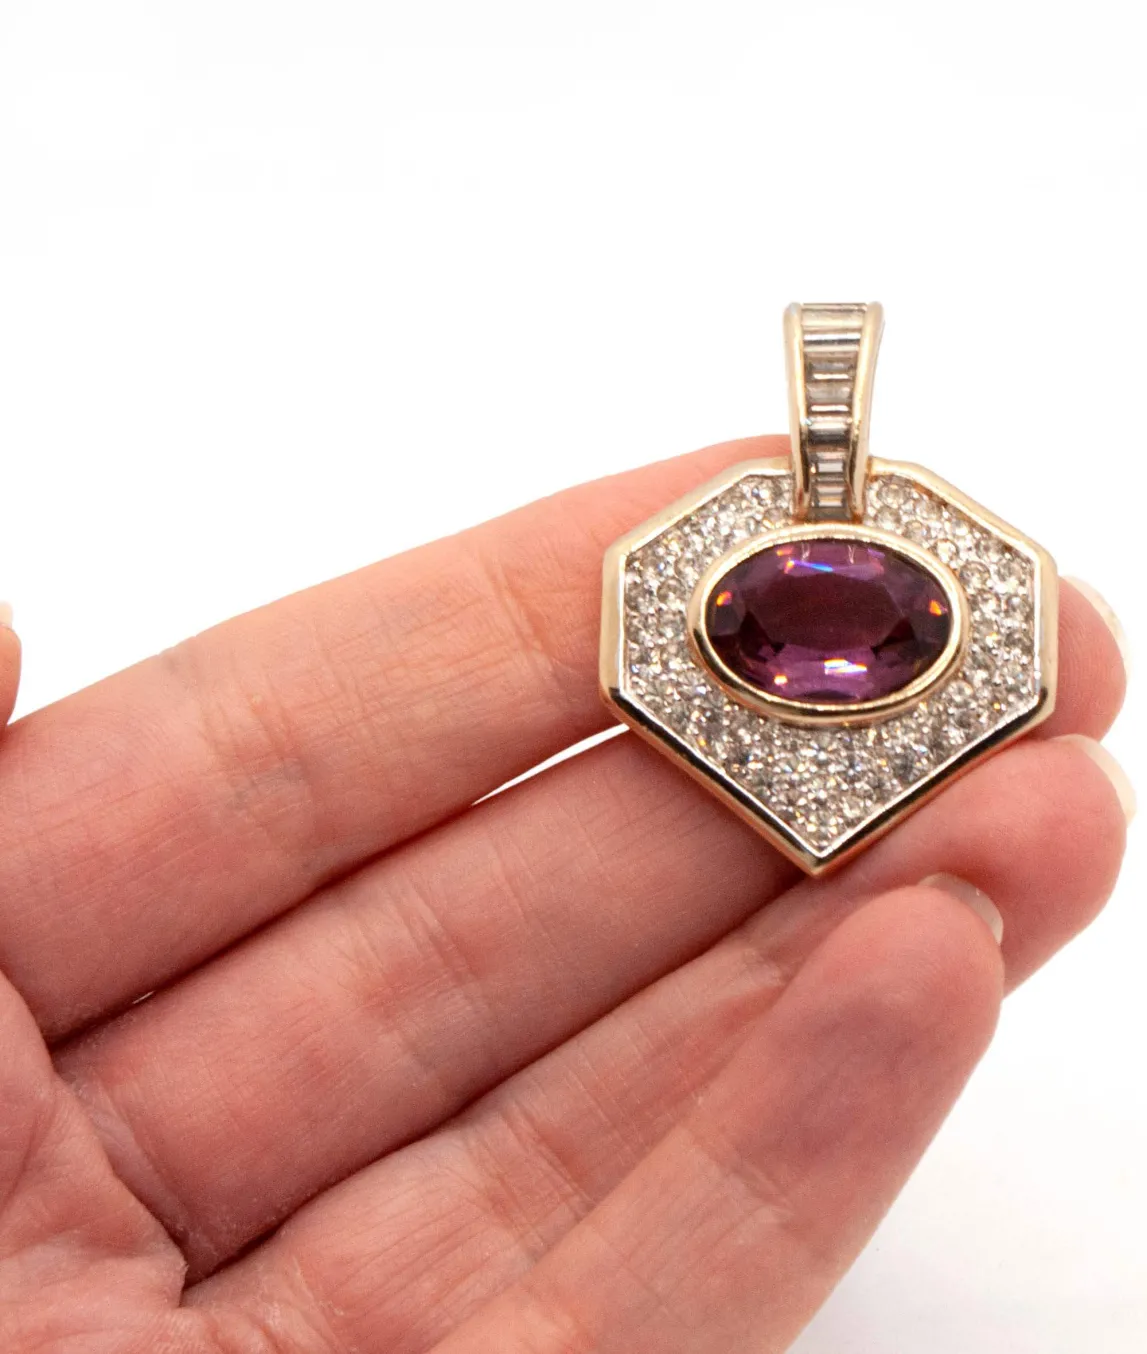 Panetta rhinestone and amethyst glass pendant set in gold plated metal held in the hand